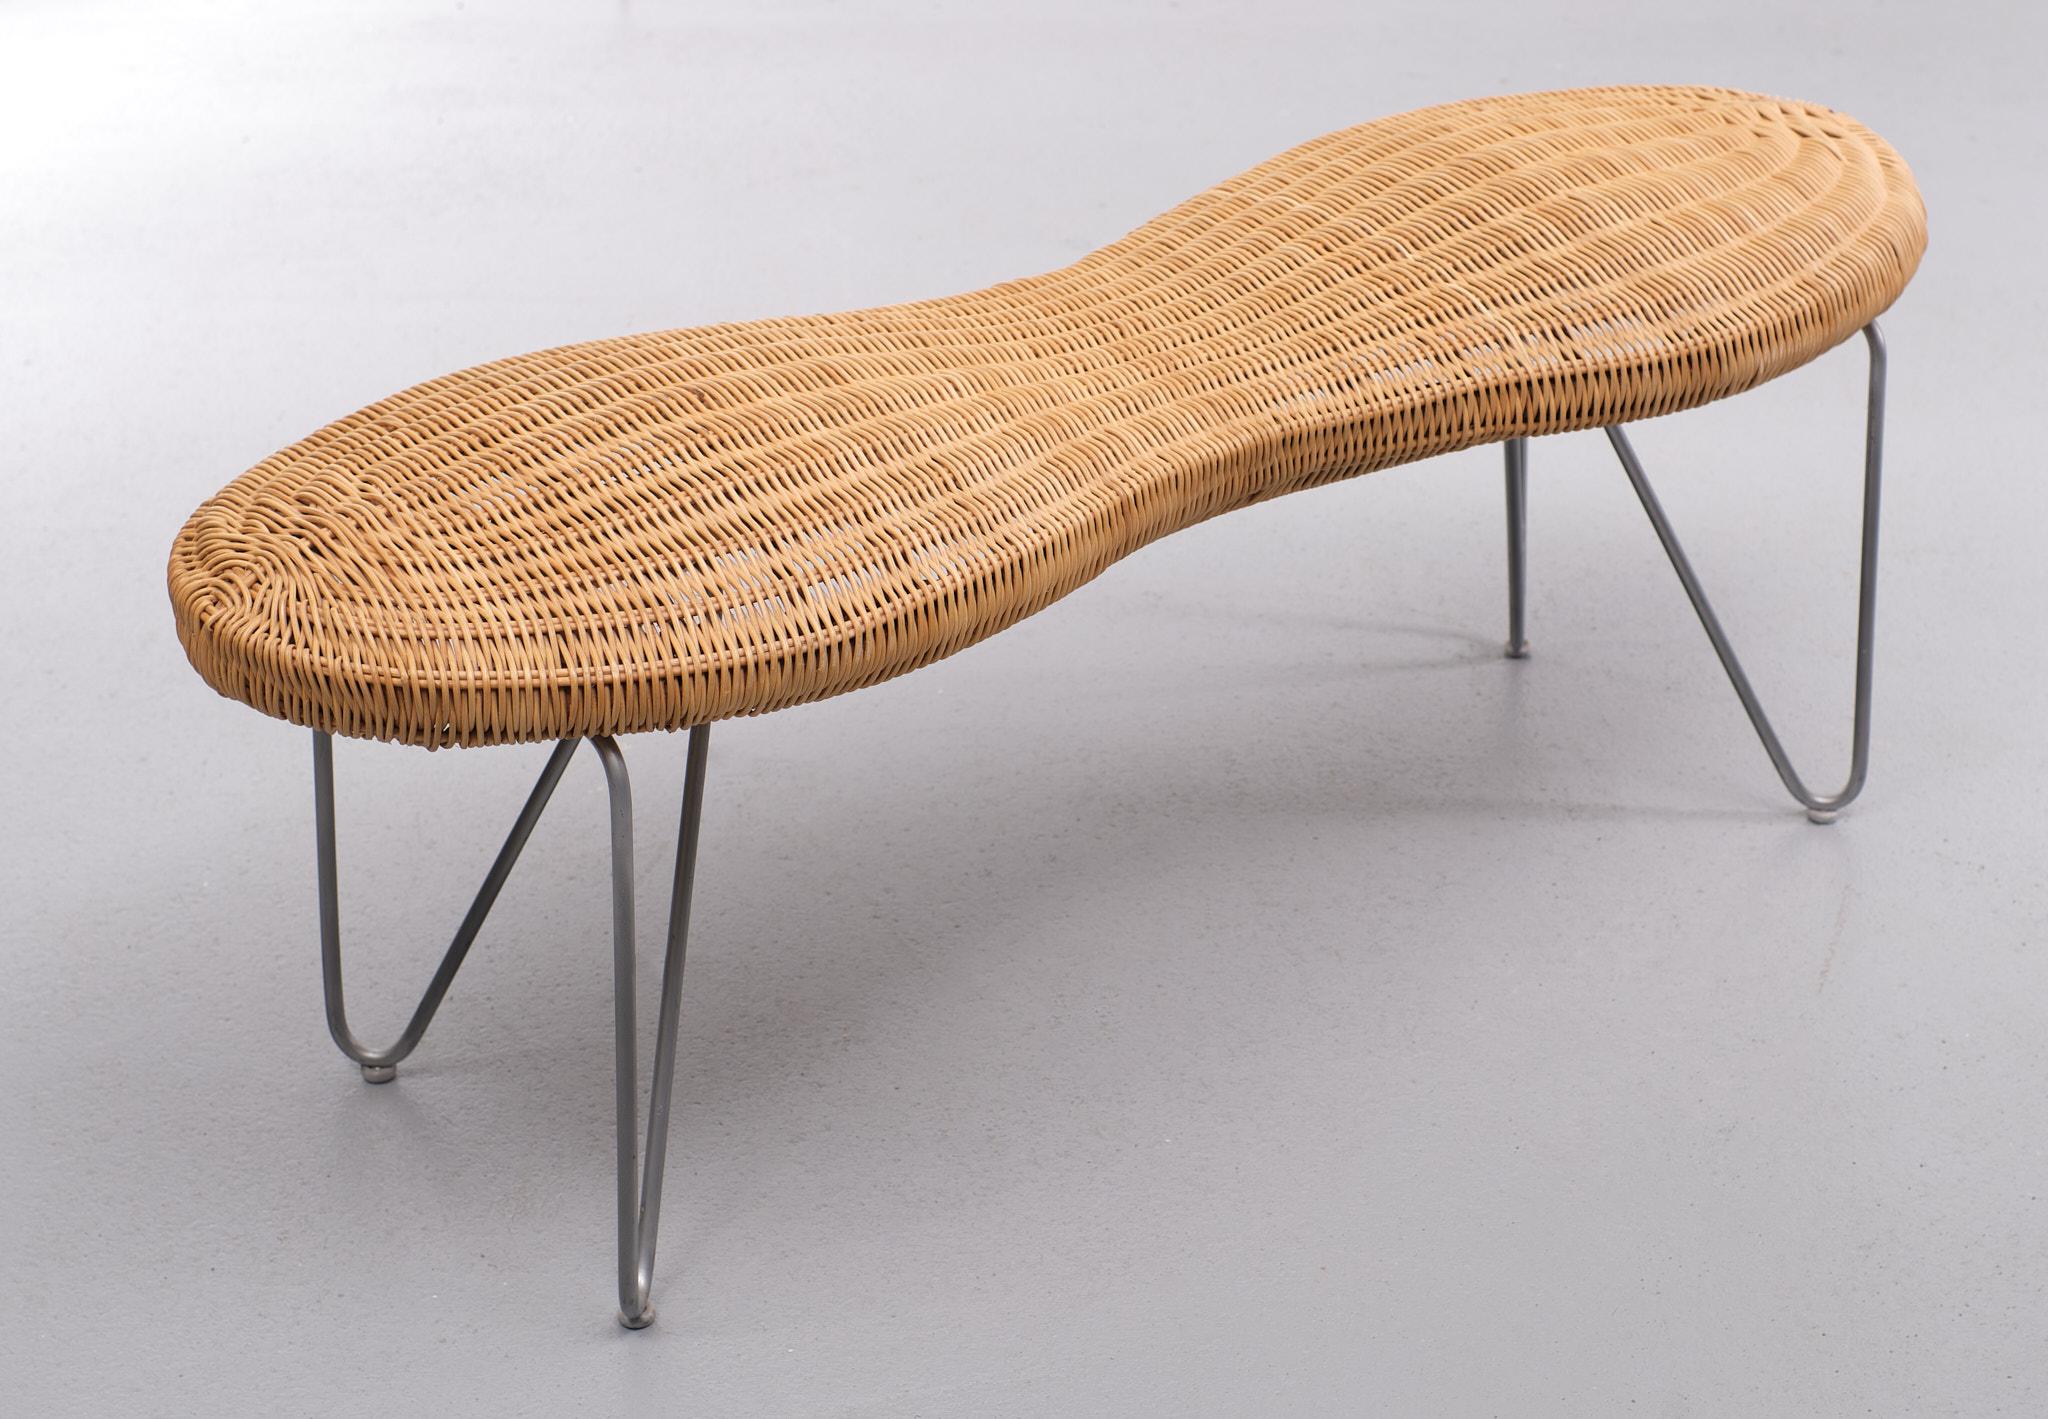 Wicker Peanut stool Ikea 1980s  In Good Condition For Sale In Den Haag, NL